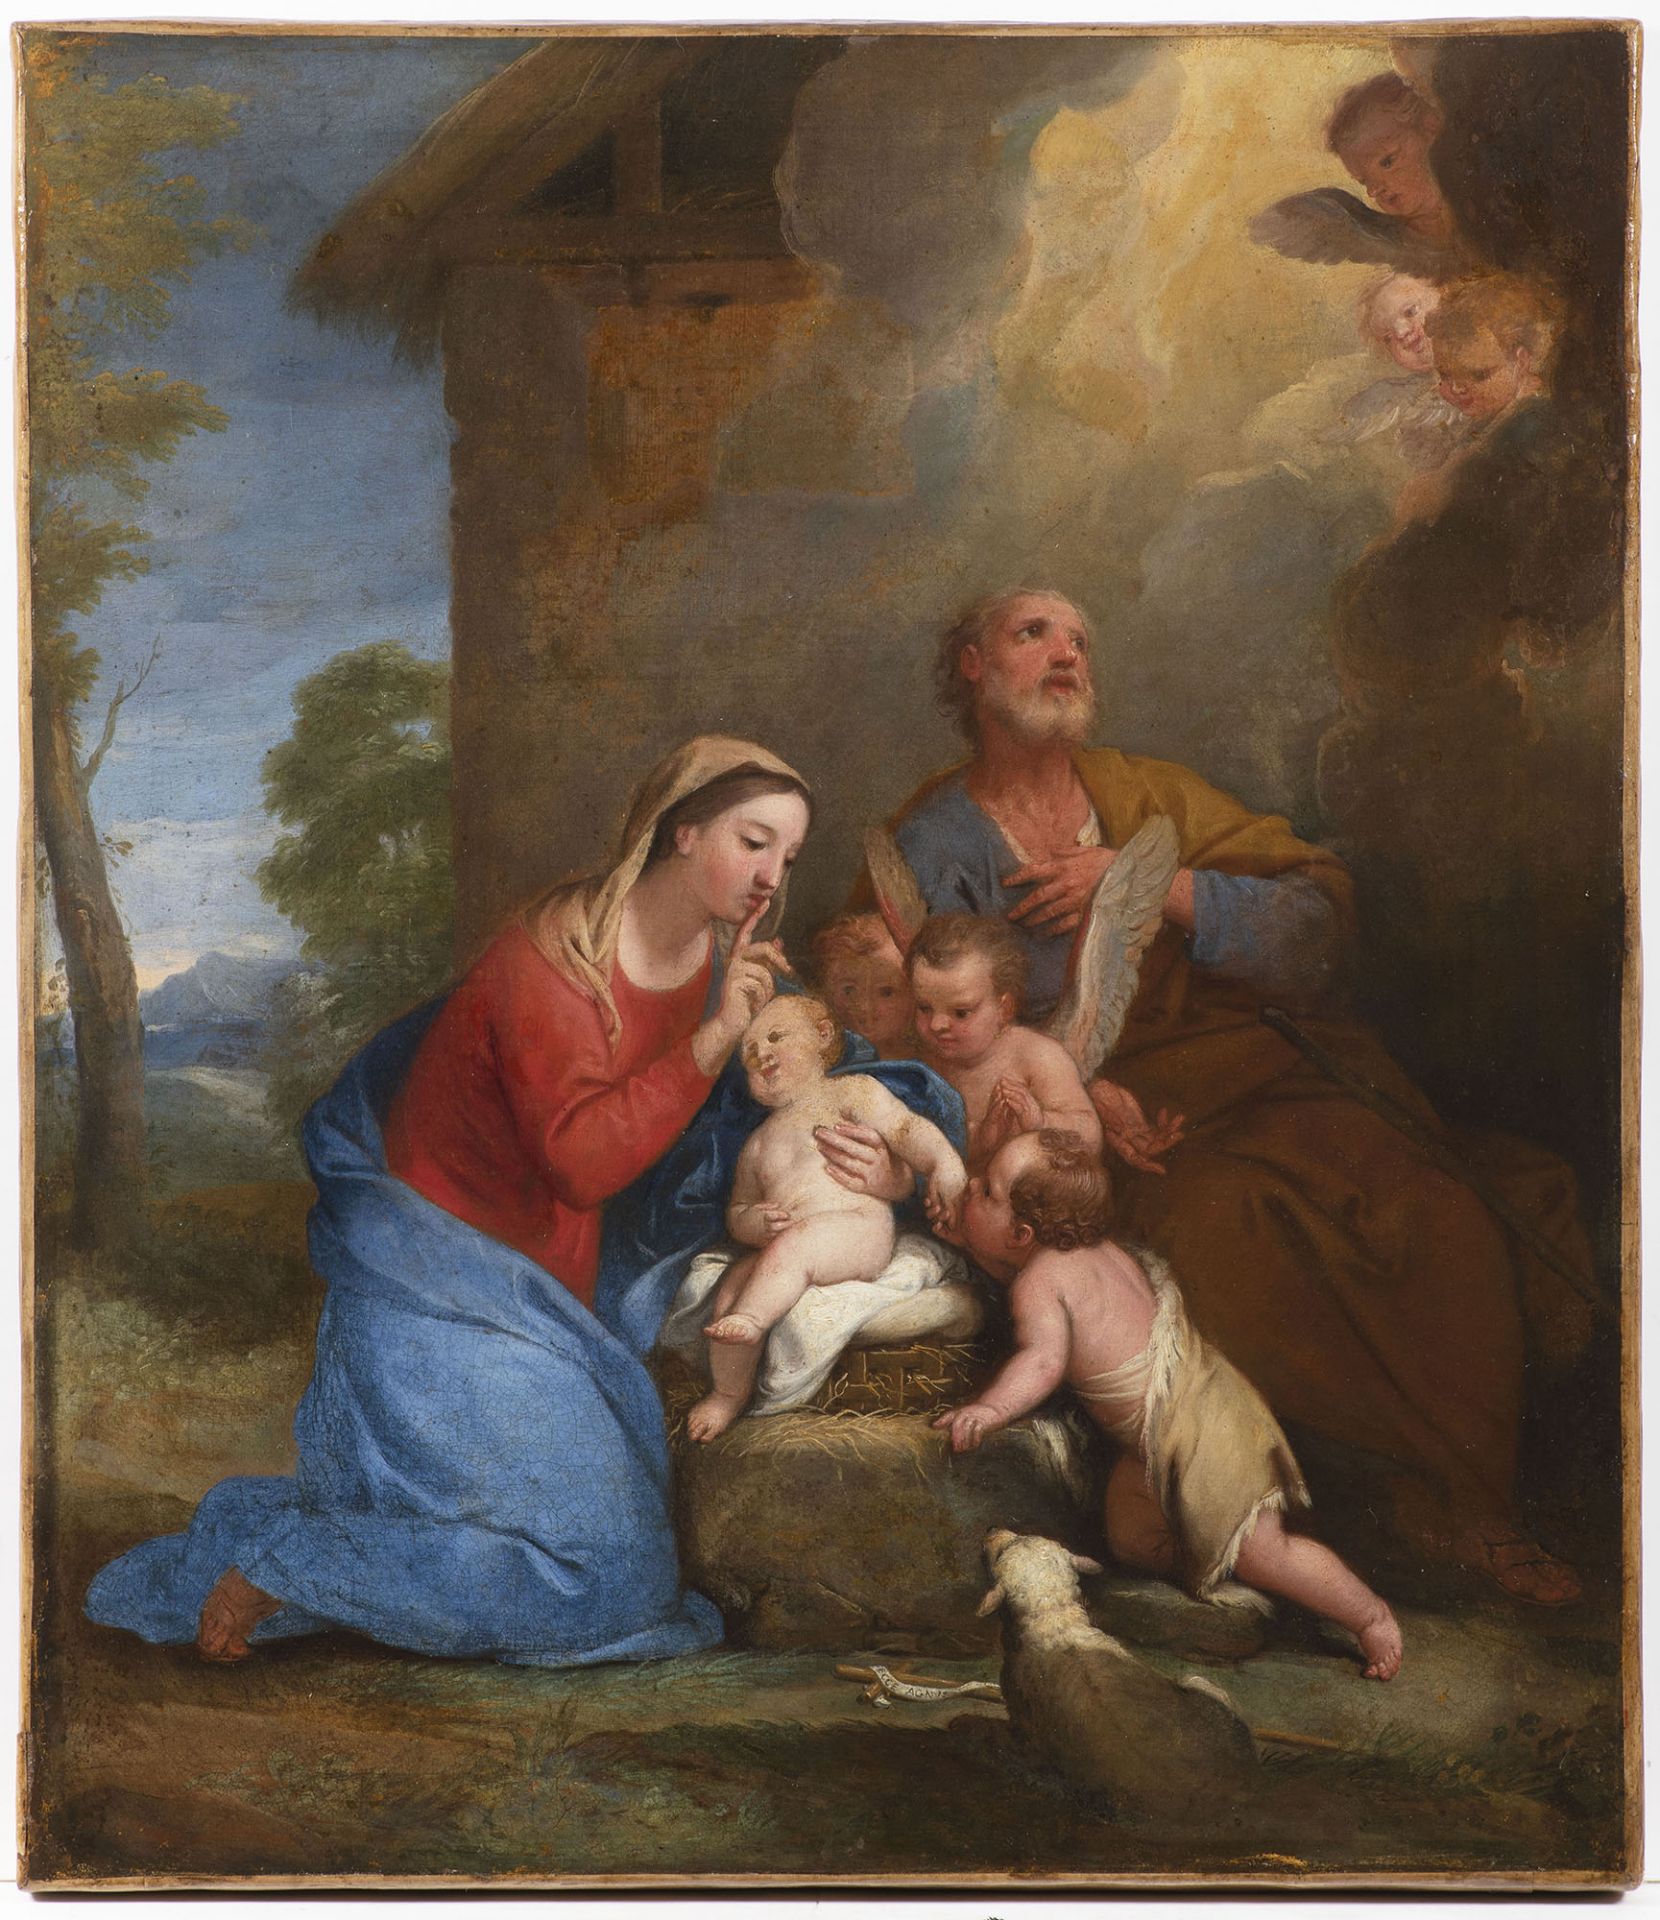 Marcantonio Franceschini, (1648, Bologna - 1729, Bologna), Atributted, The Holy Family with little J